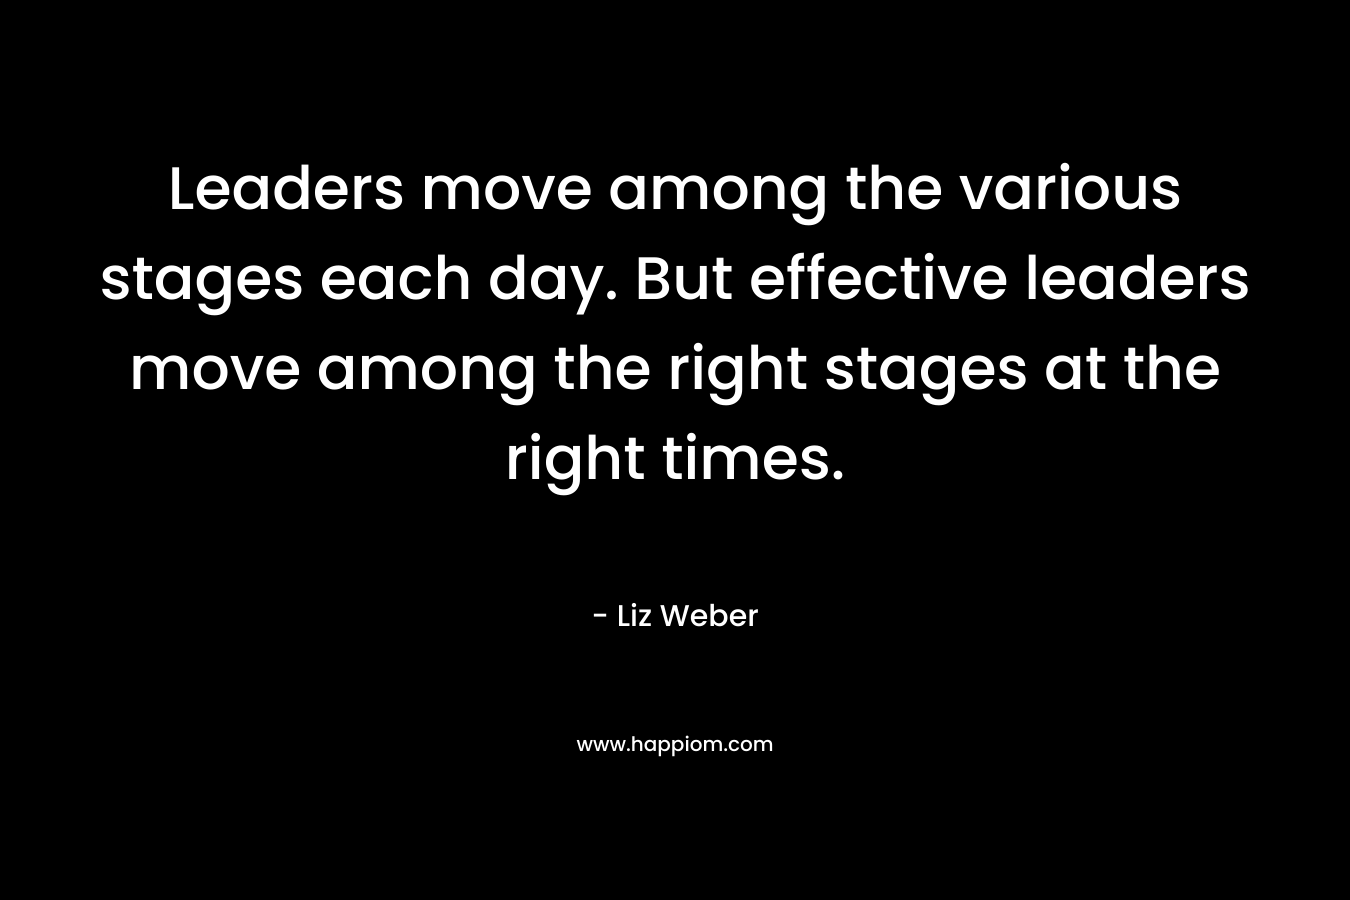 Leaders move among the various stages each day. But effective leaders move among the right stages at the right times. – Liz Weber